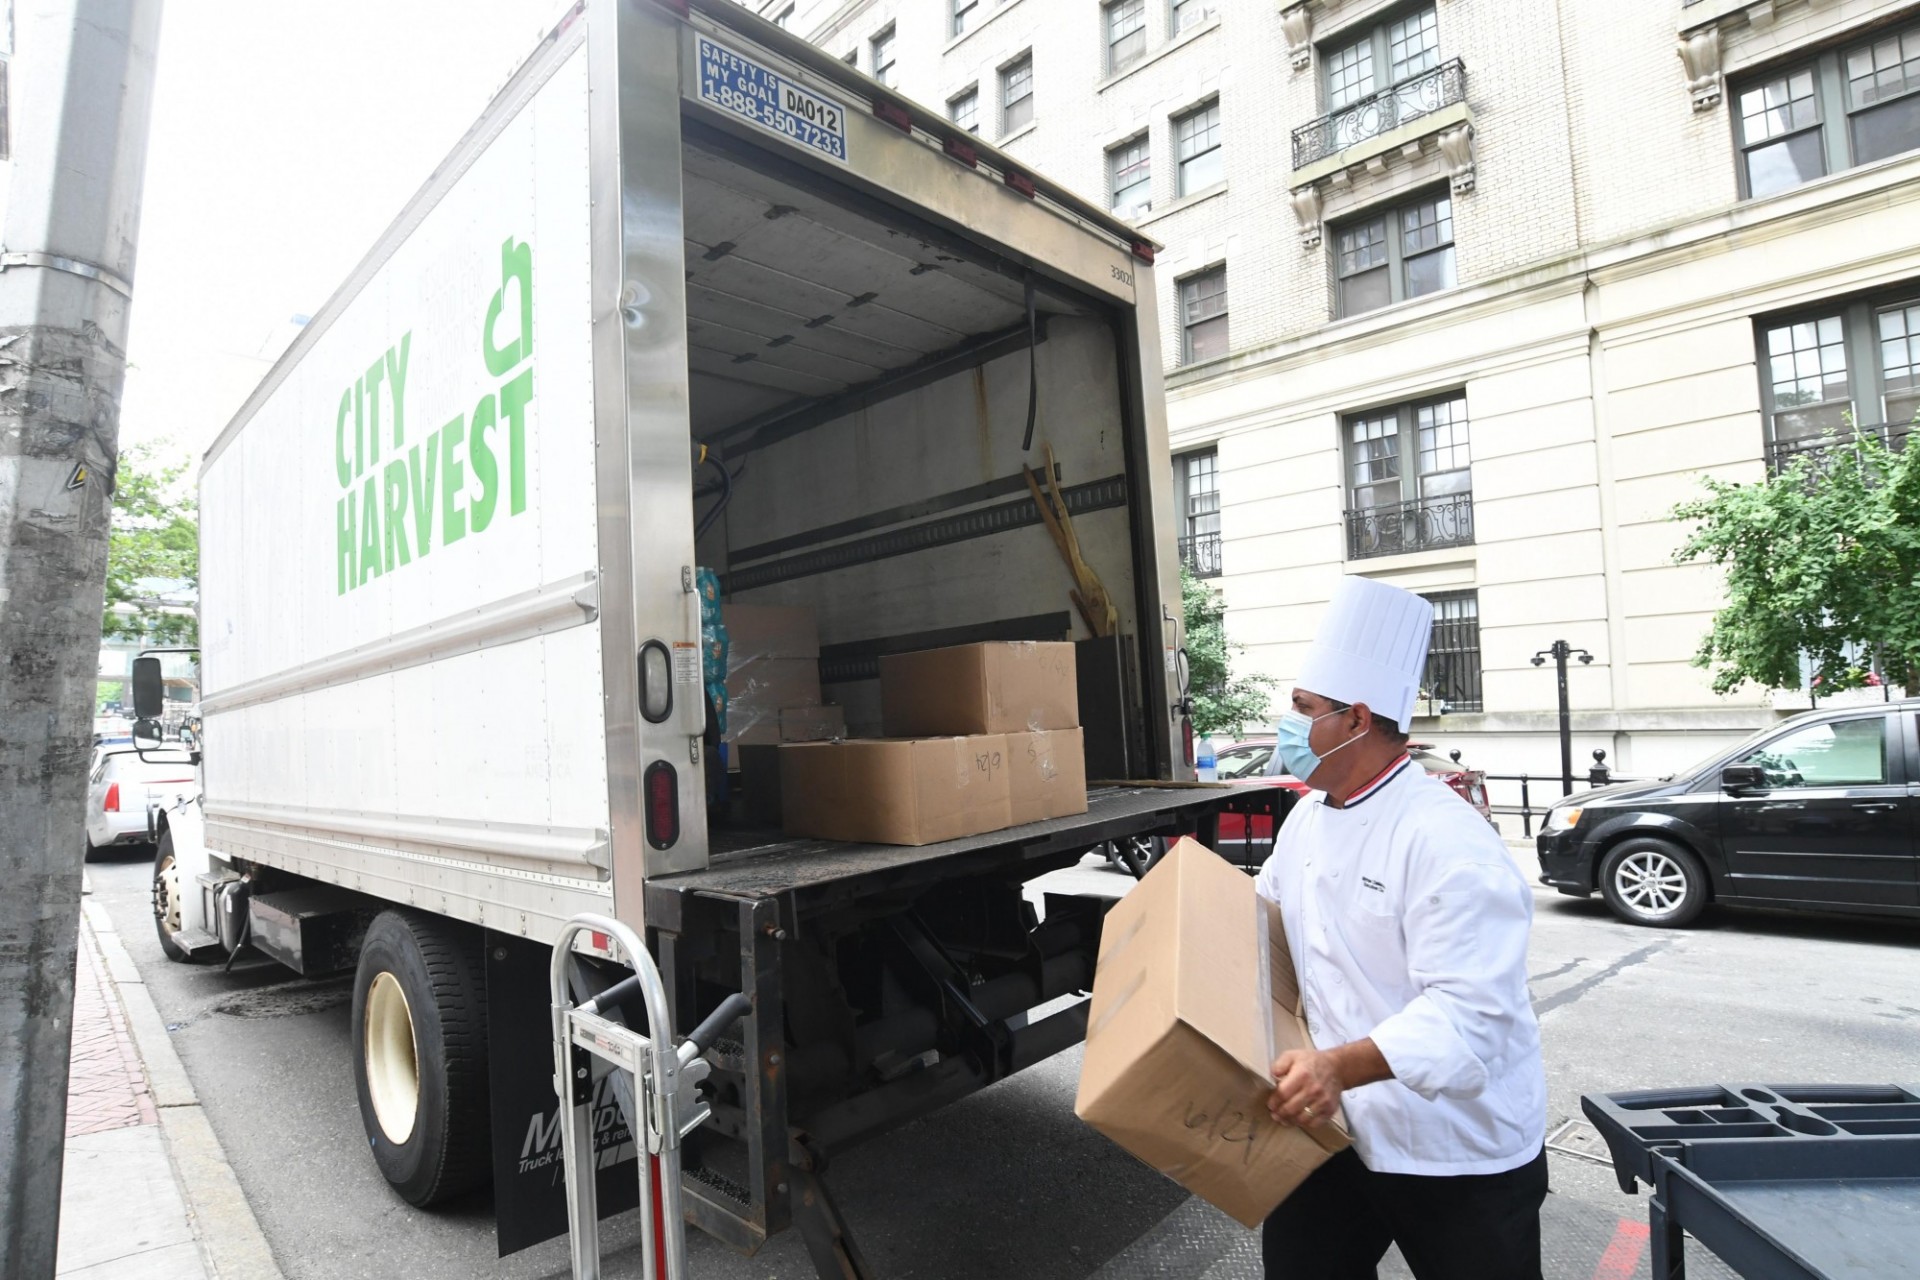 Chef Mike loads boxes of food into a waiting City Harvest truck